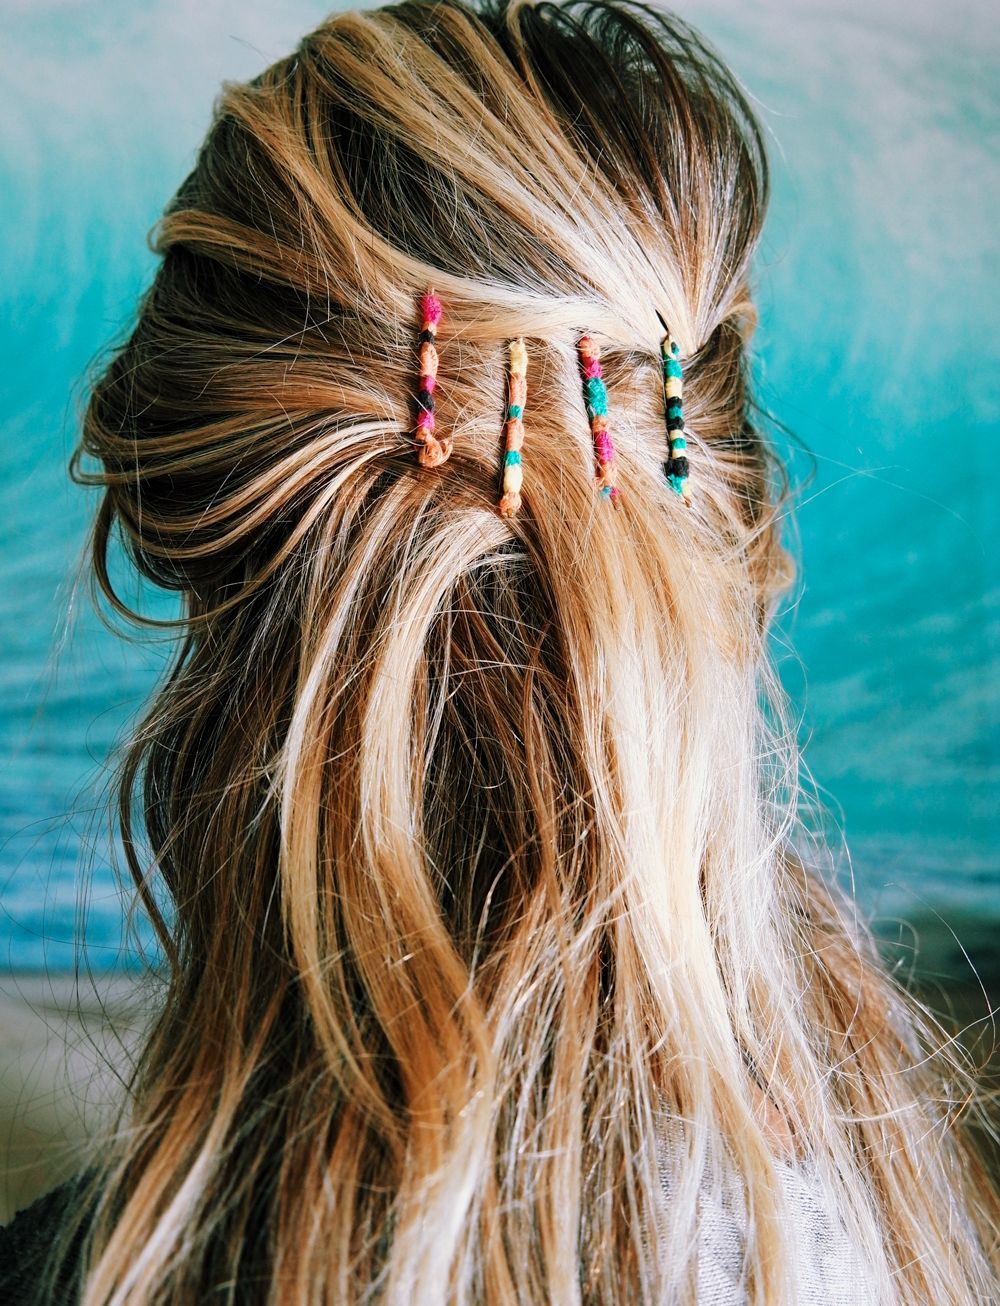 Friendship Bracelet Bobby Pins -   18 hairstyles Casual french twists ideas